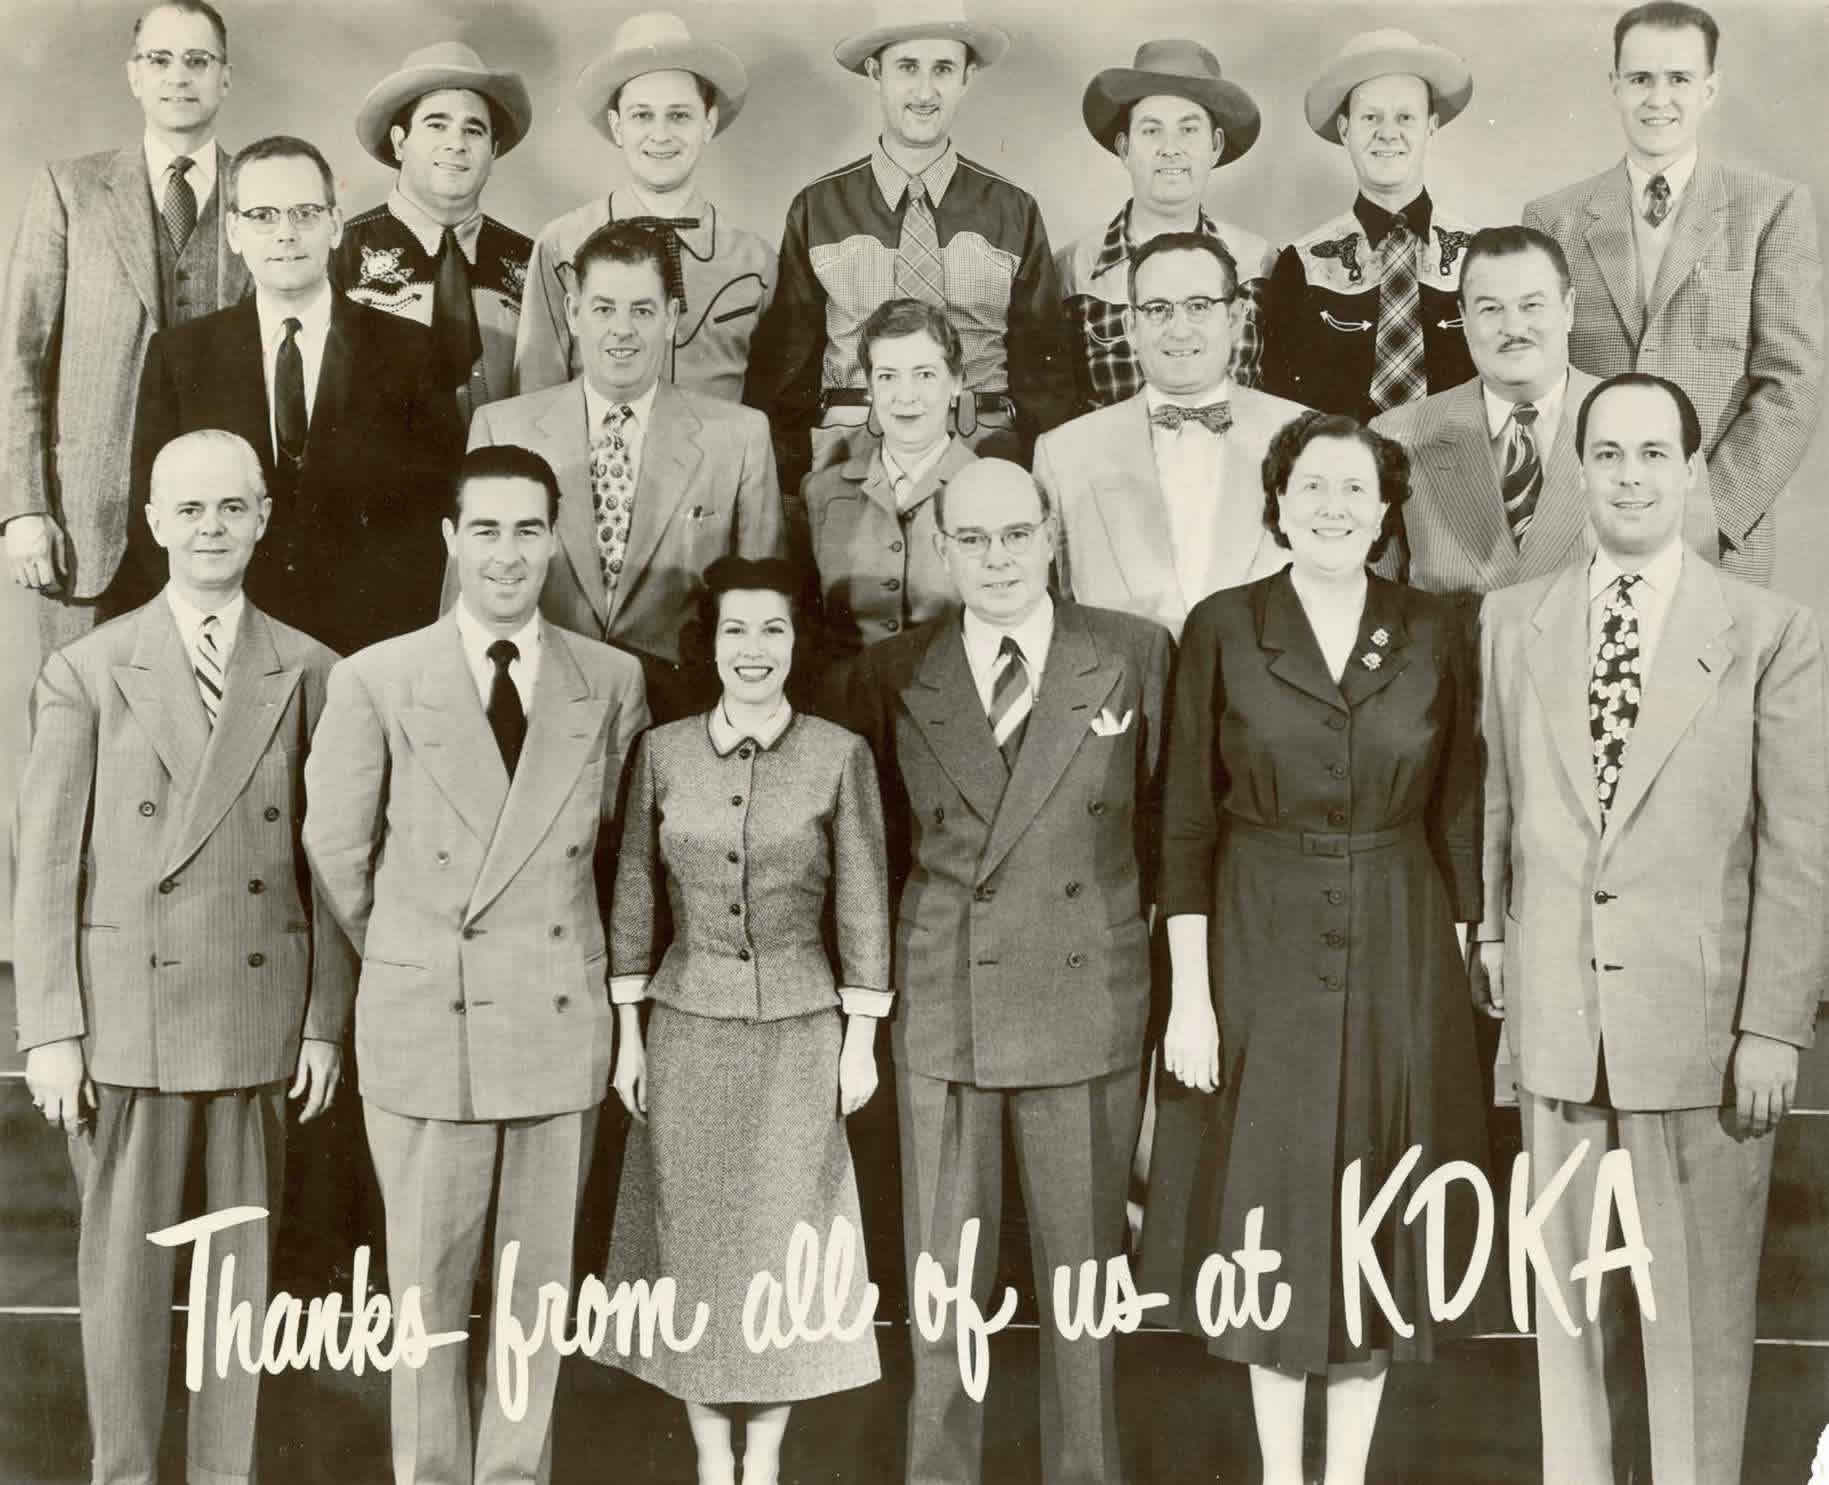 The KDKA Staff in the 1940s